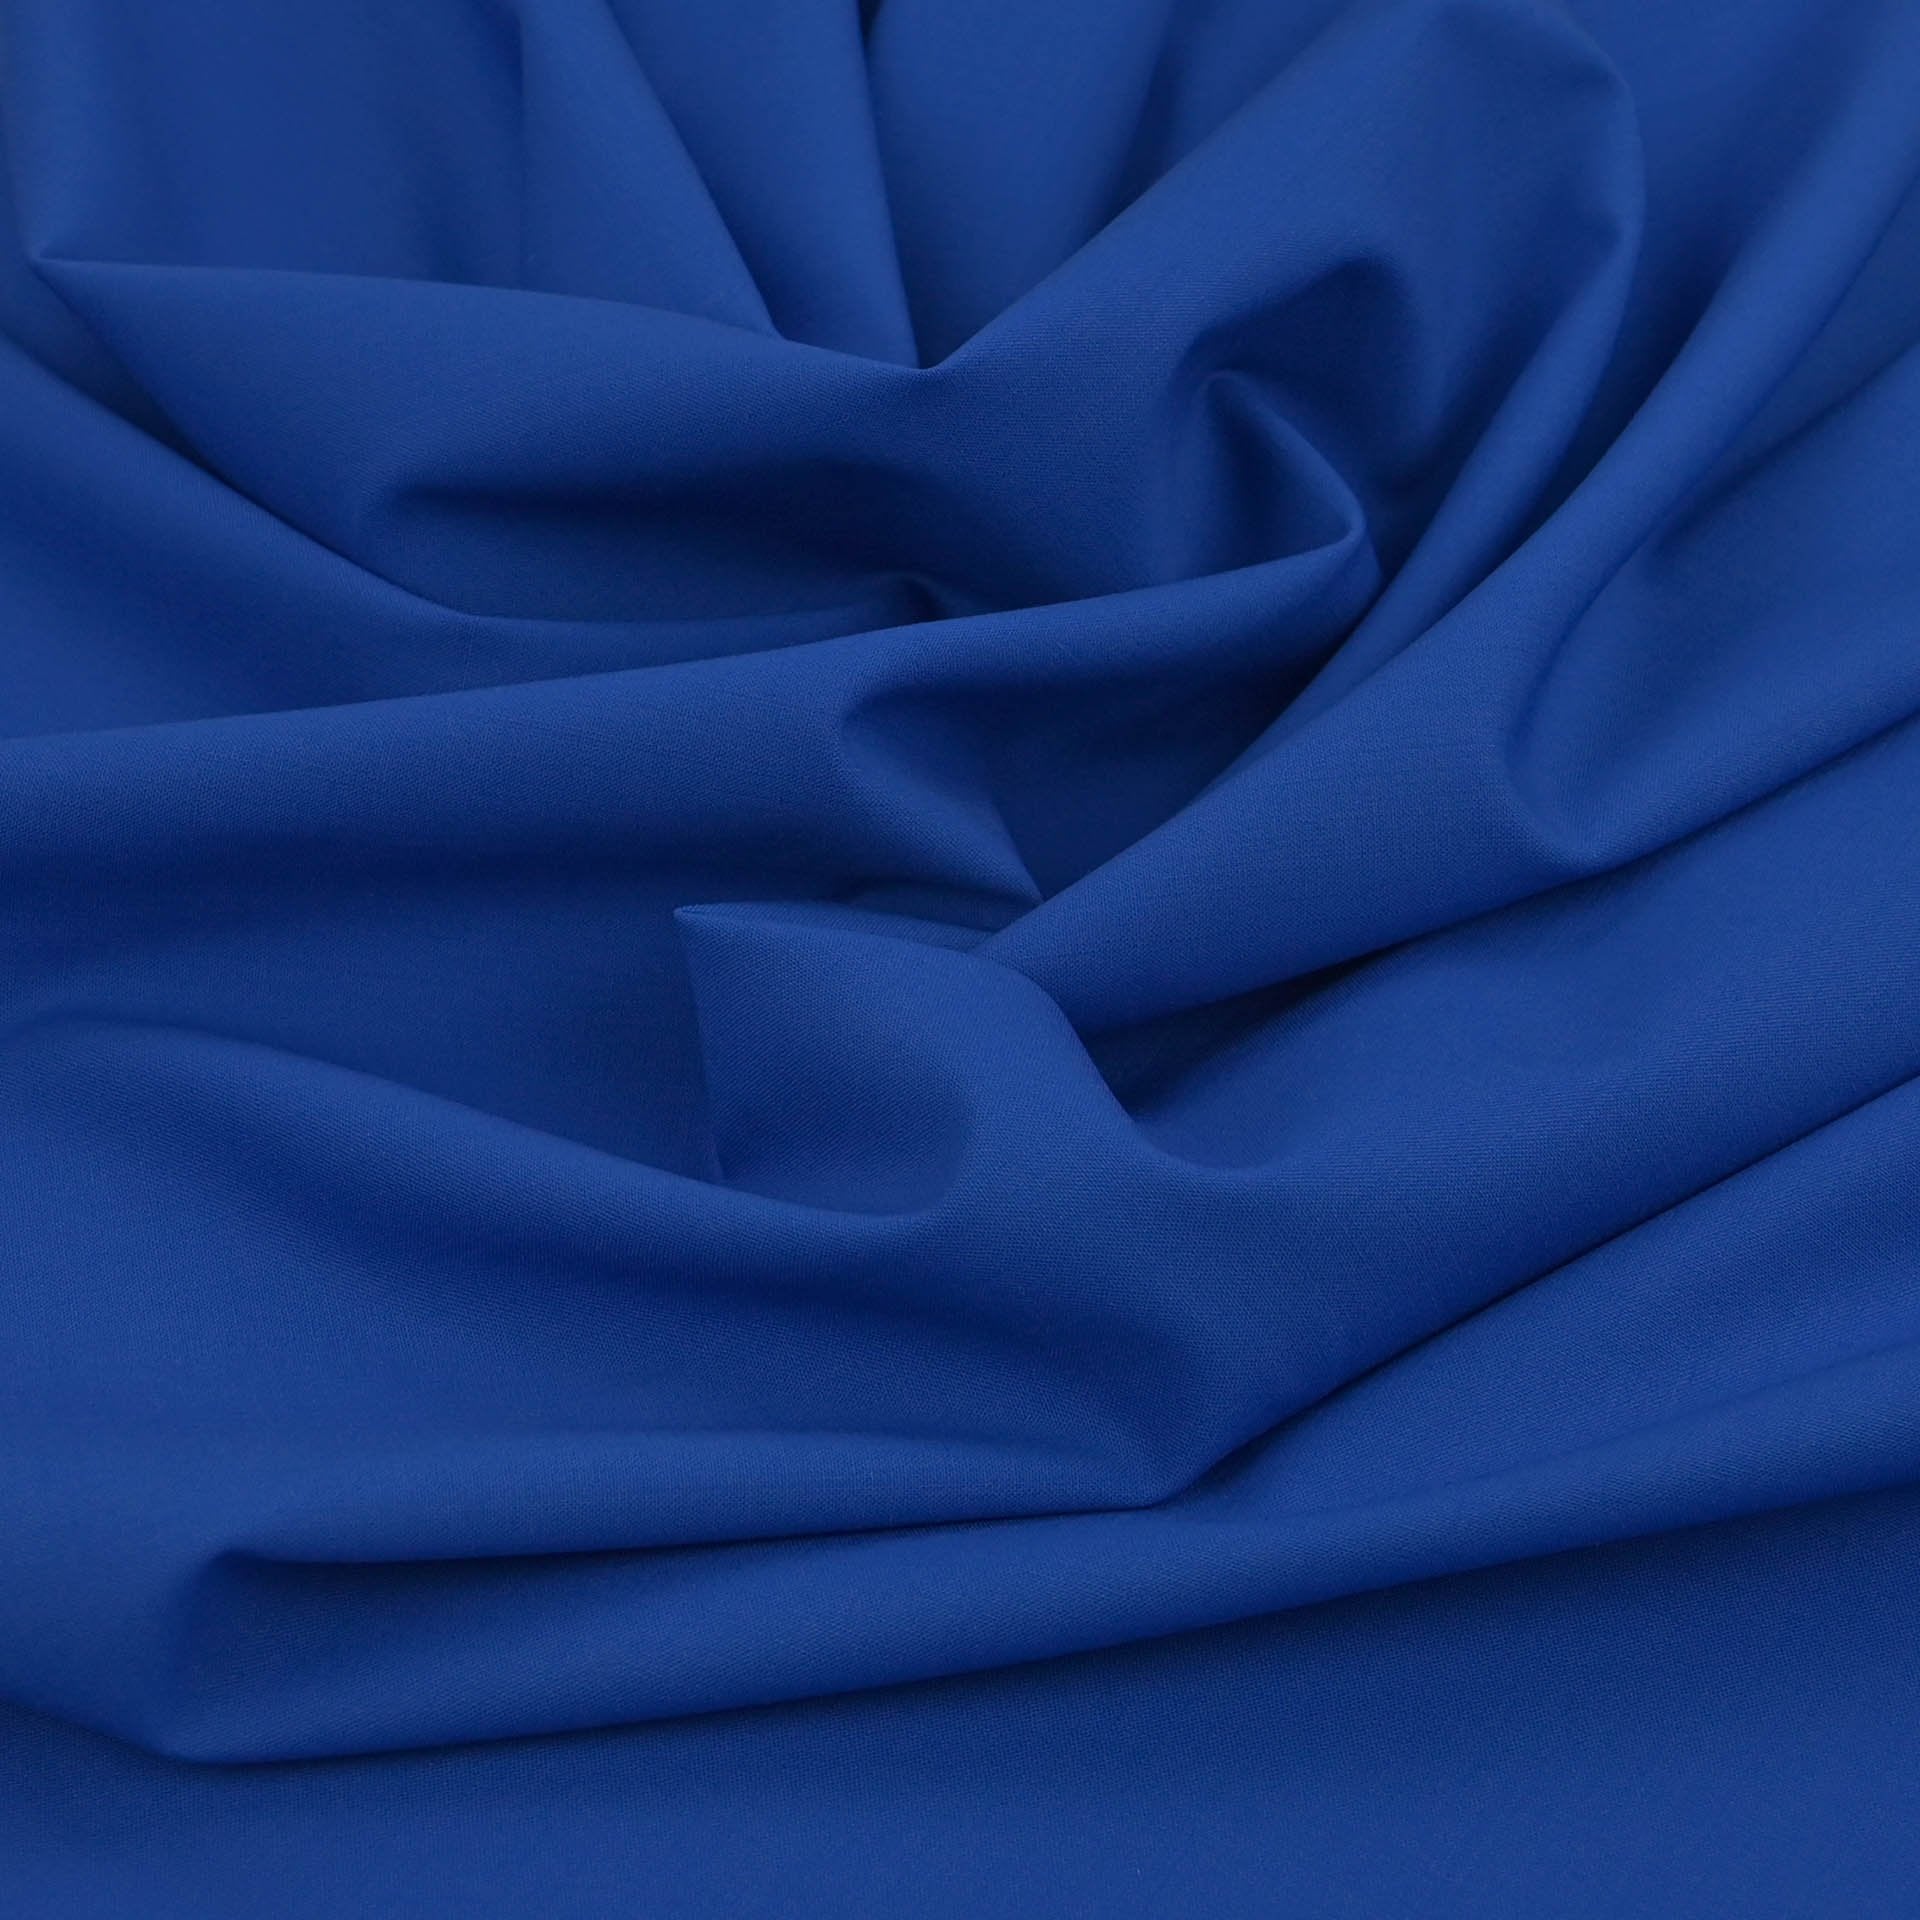 Royal Blue Suiting Fabric 4805